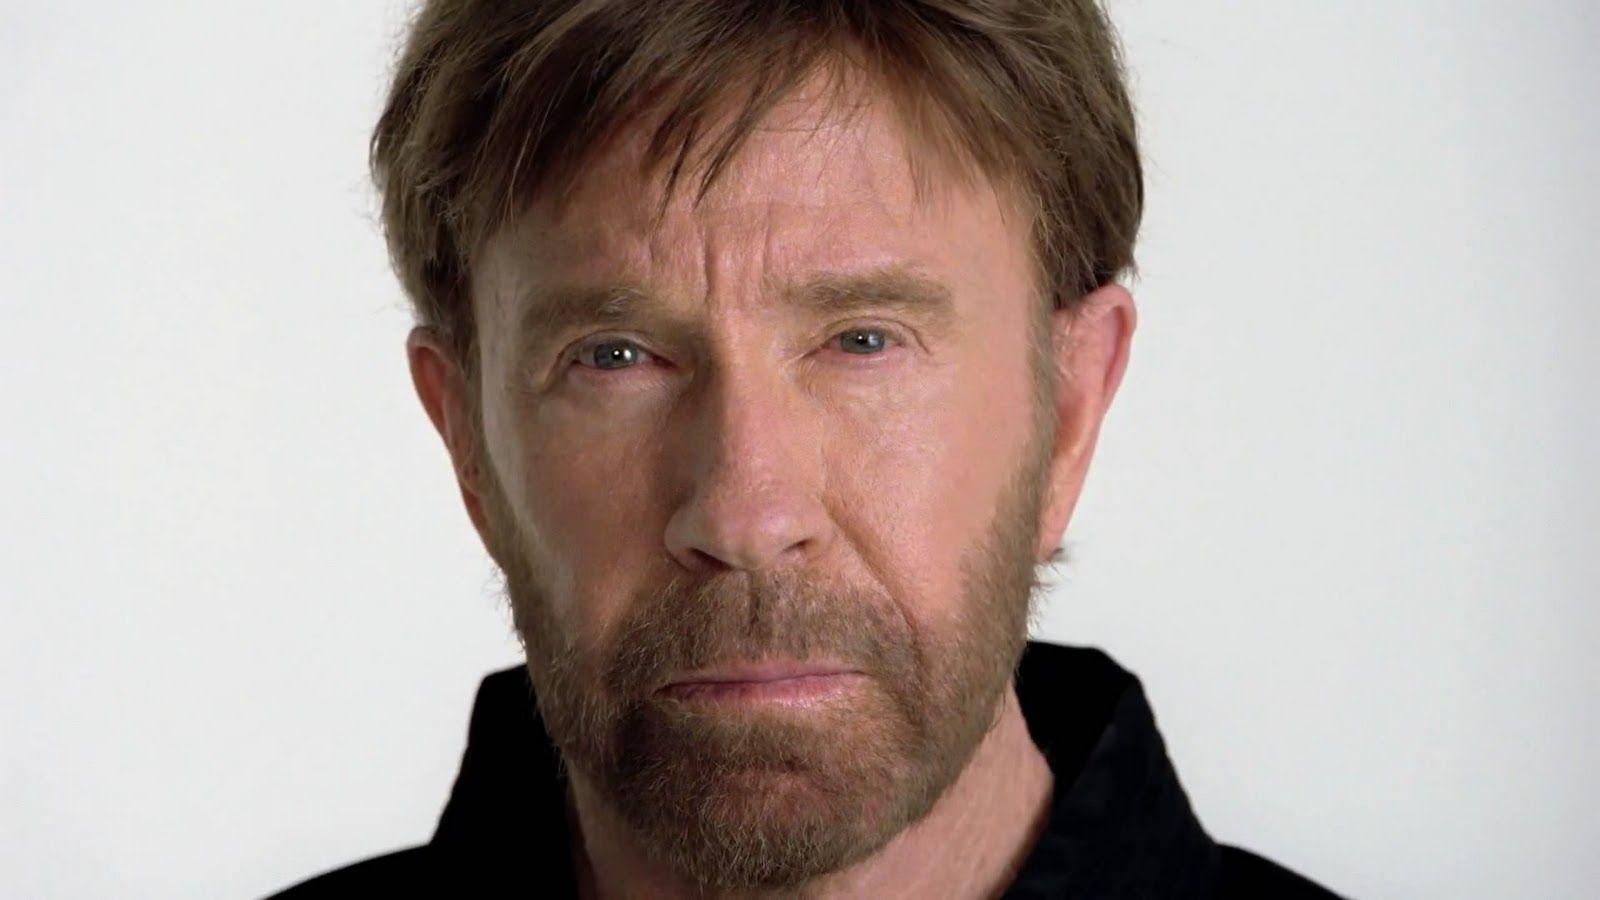 Chuck Norris High Resolution Wallpaper 1223 Image. largepict